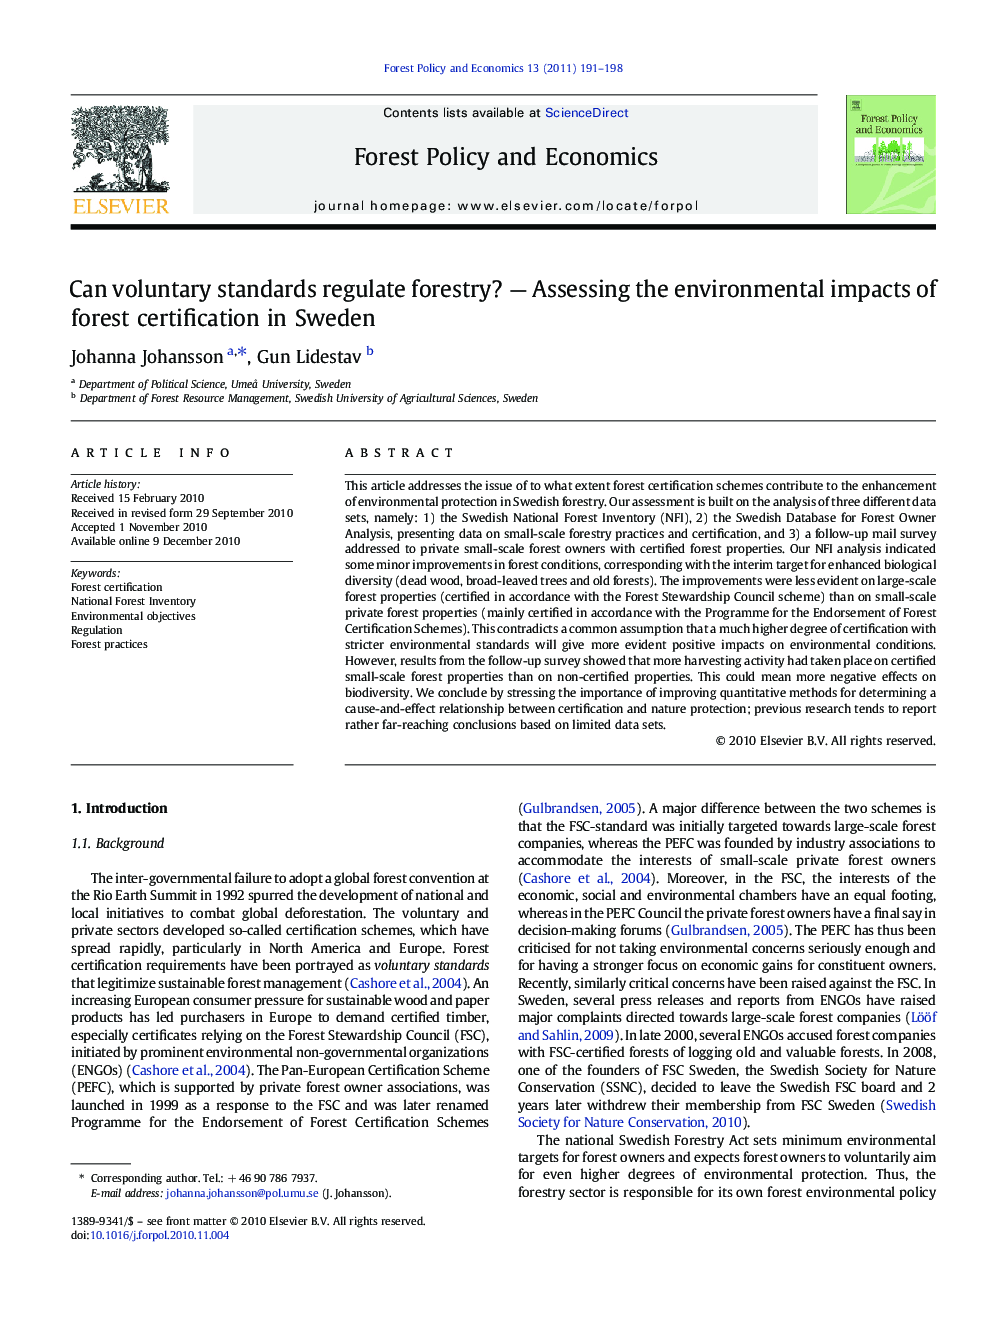 Can voluntary standards regulate forestry? — Assessing the environmental impacts of forest certification in Sweden